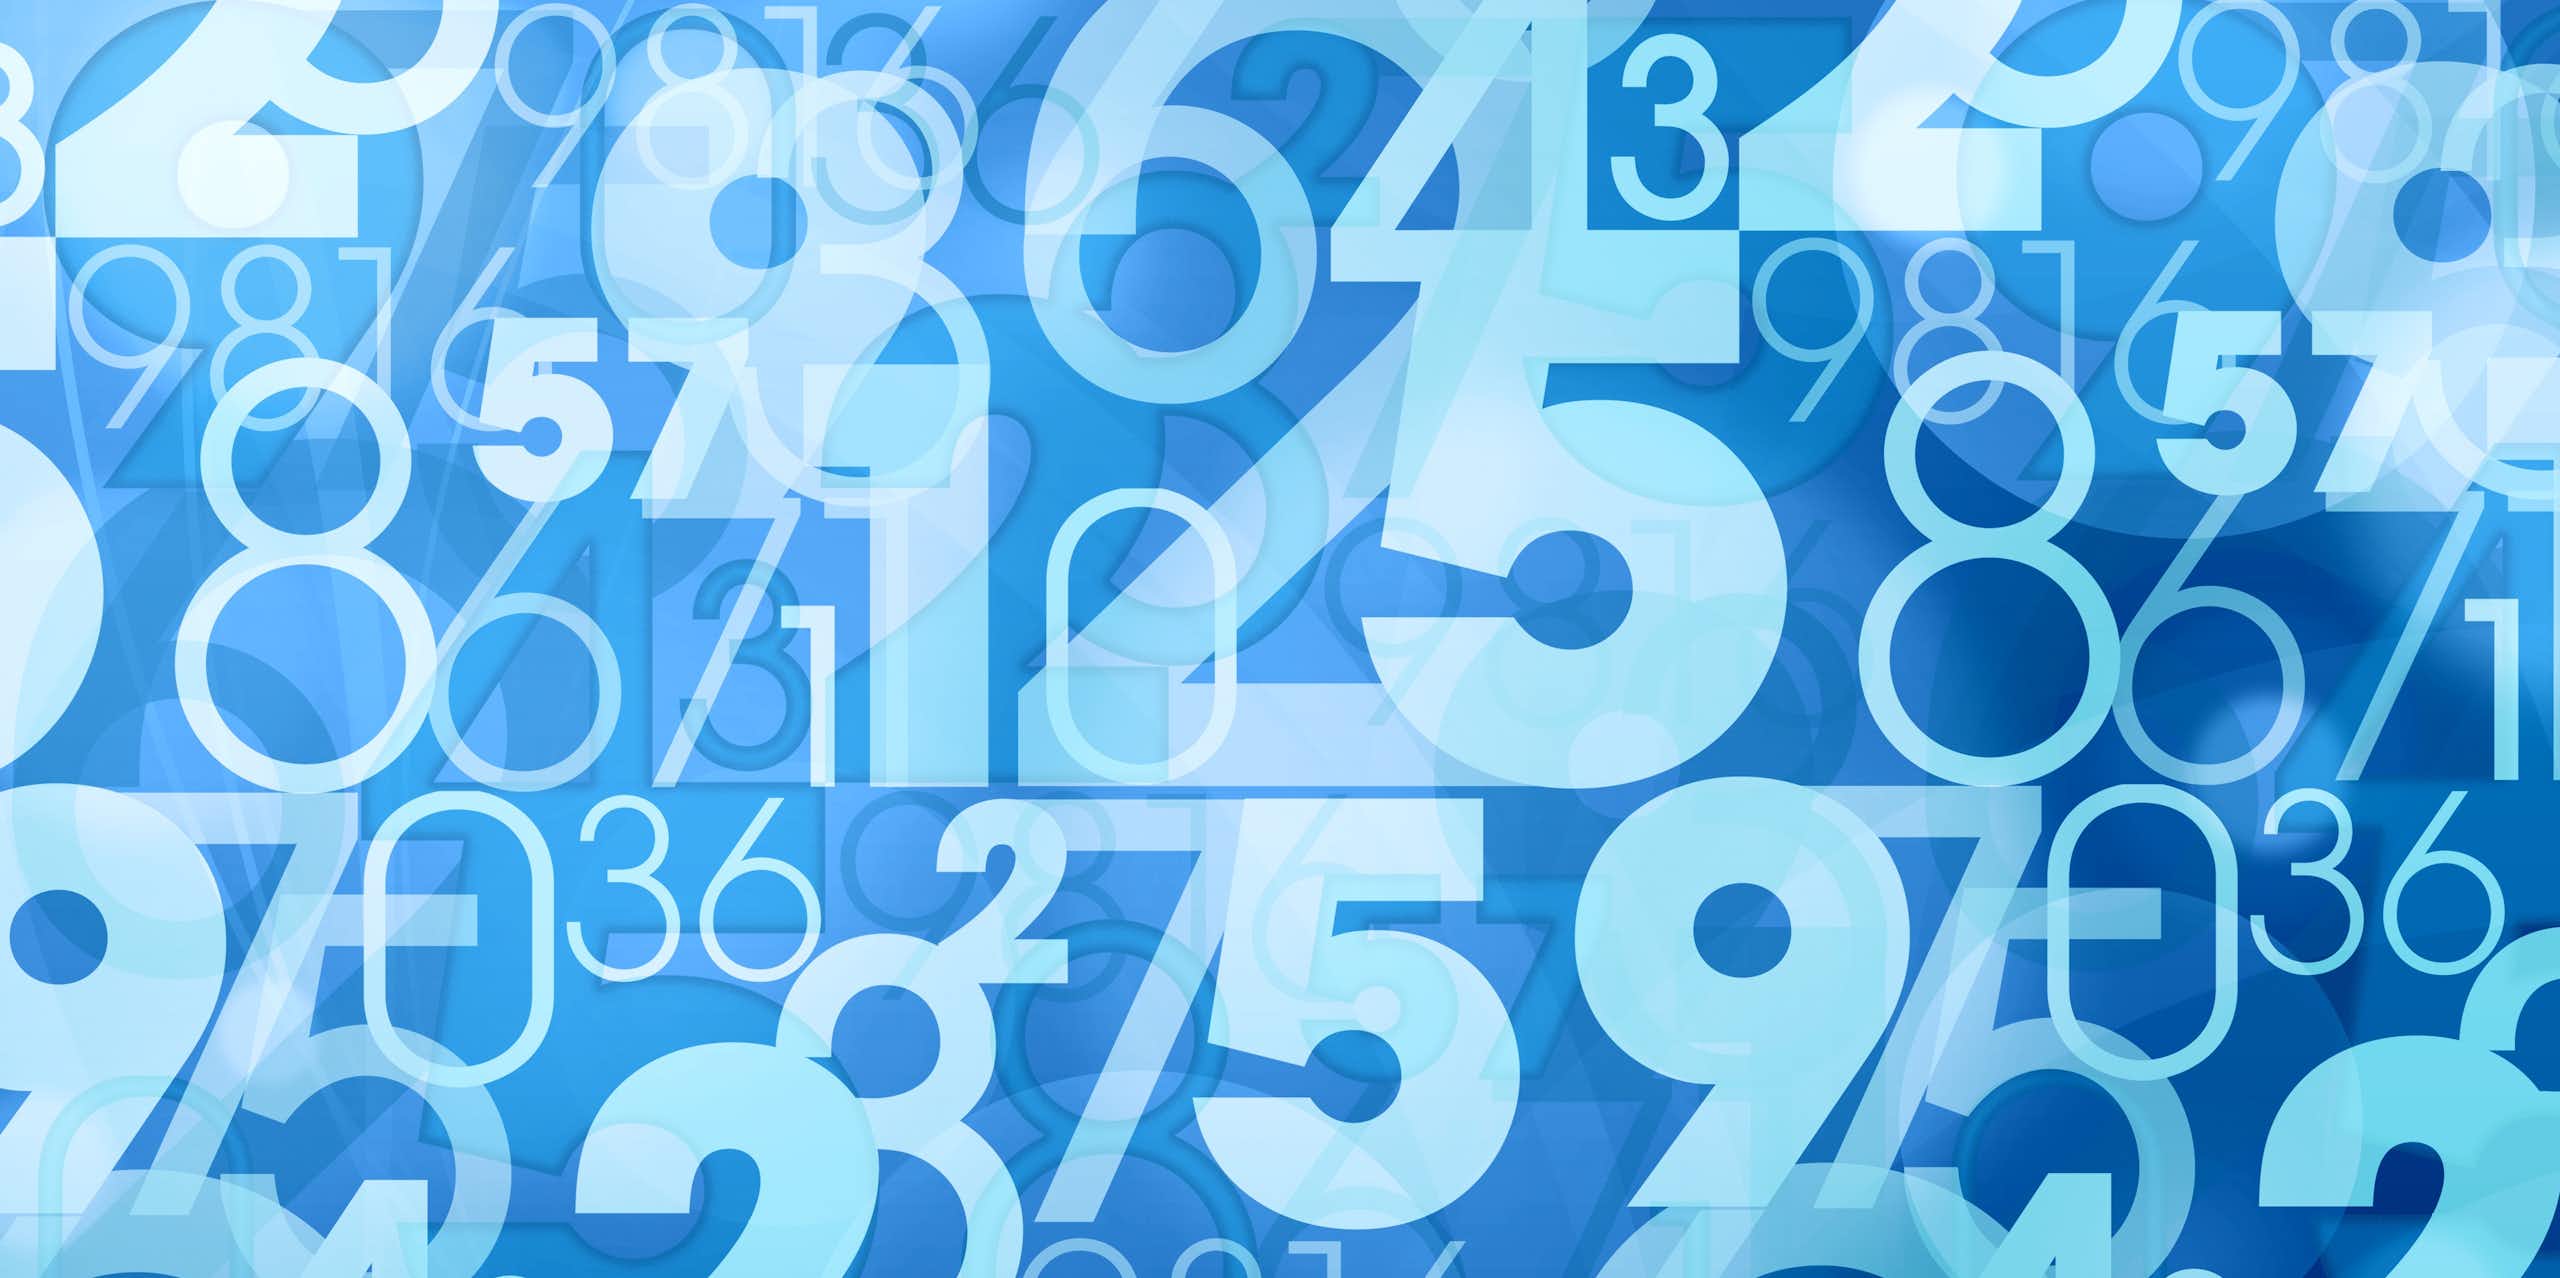 Against a blue background, a pattern of jumbled numbers appears.